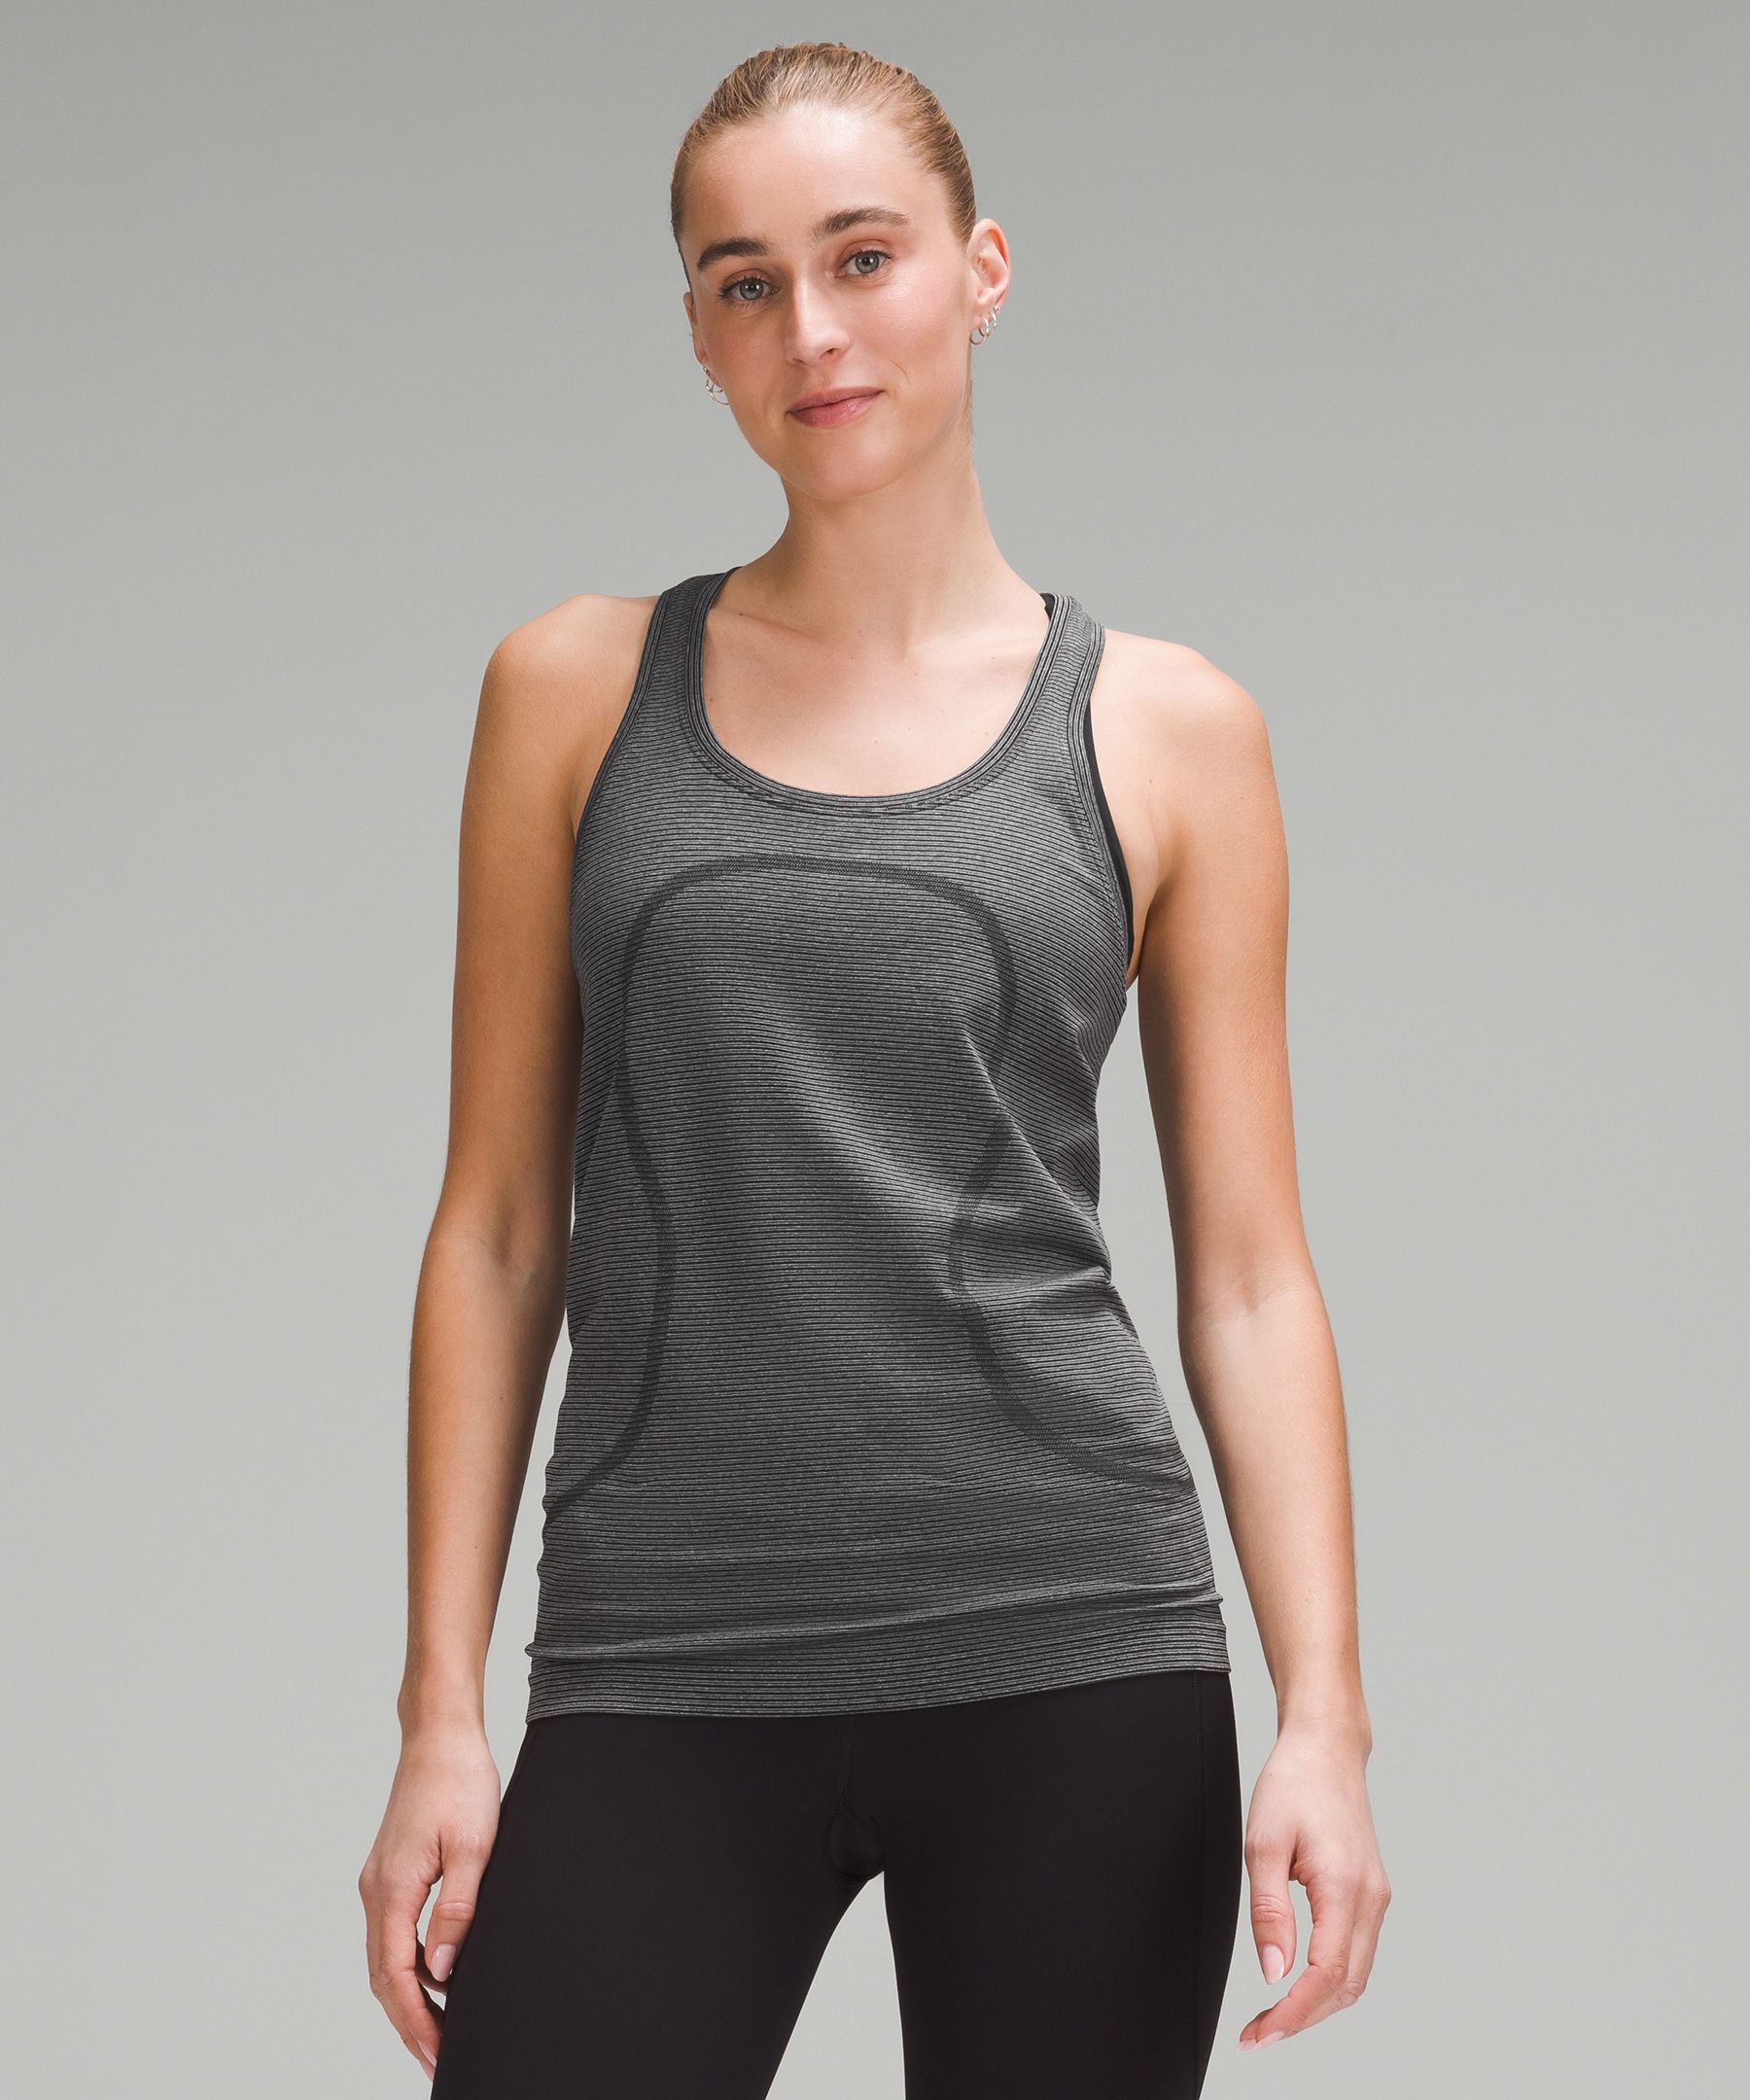 Lululemon Cool Racerback Nulu Tank Gray Size 2 - $23 (61% Off Retail) -  From sophie